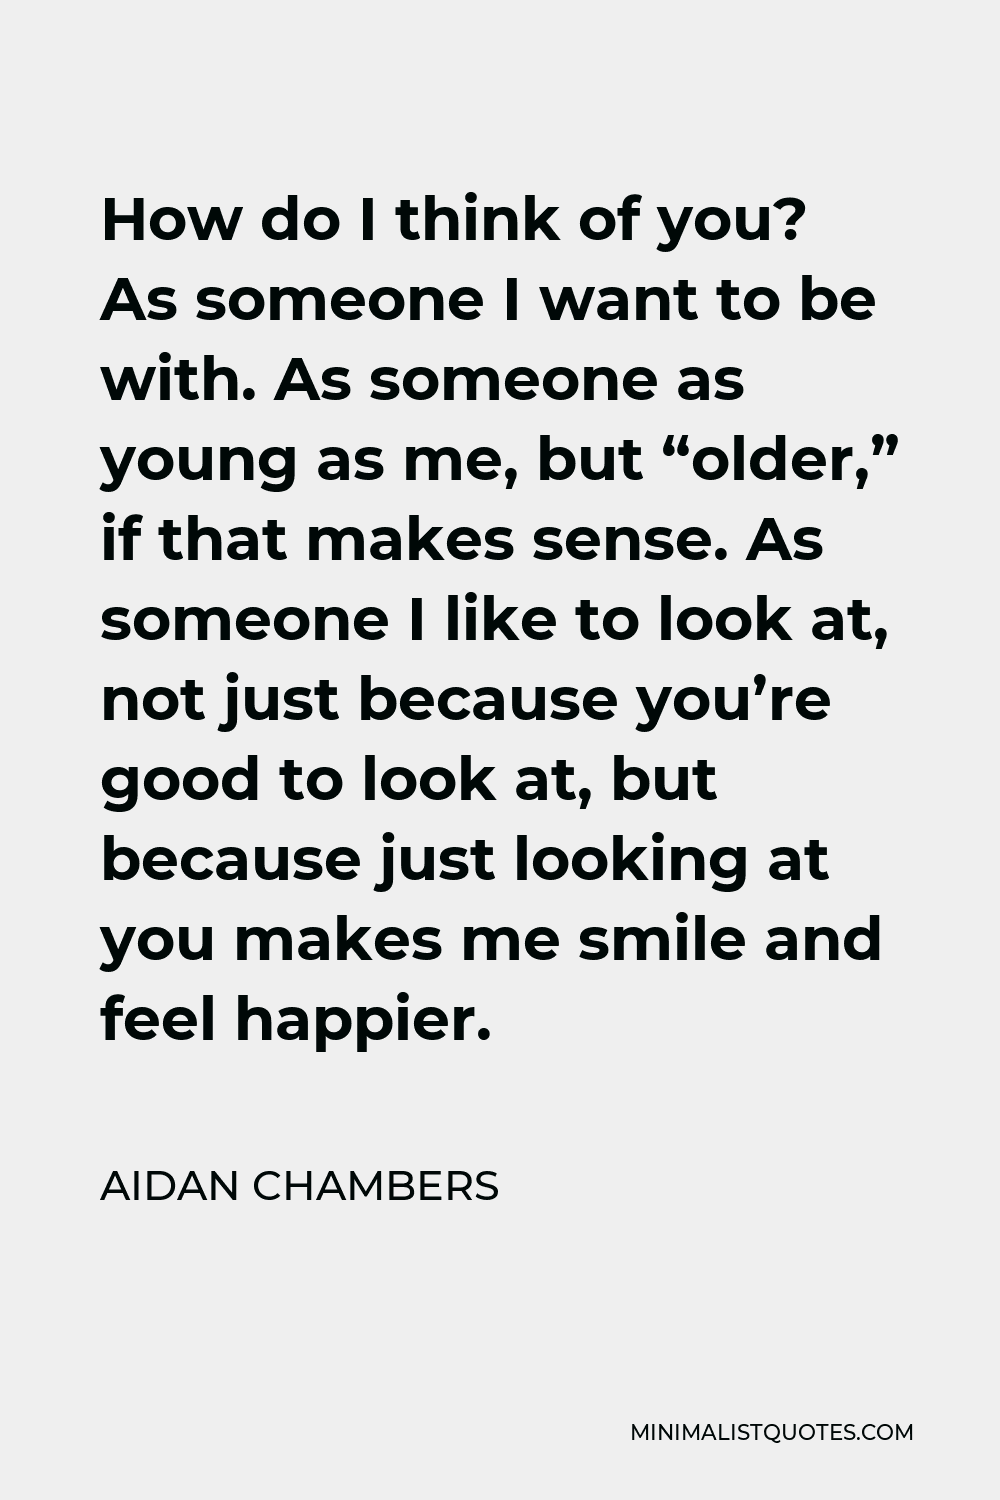 Aidan Chambers Quote - How do I think of you? As someone I want to be with. As someone as young as me, but “older,” if that makes sense. As someone I like to look at, not just because you’re good to look at, but because just looking at you makes me smile and feel happier.